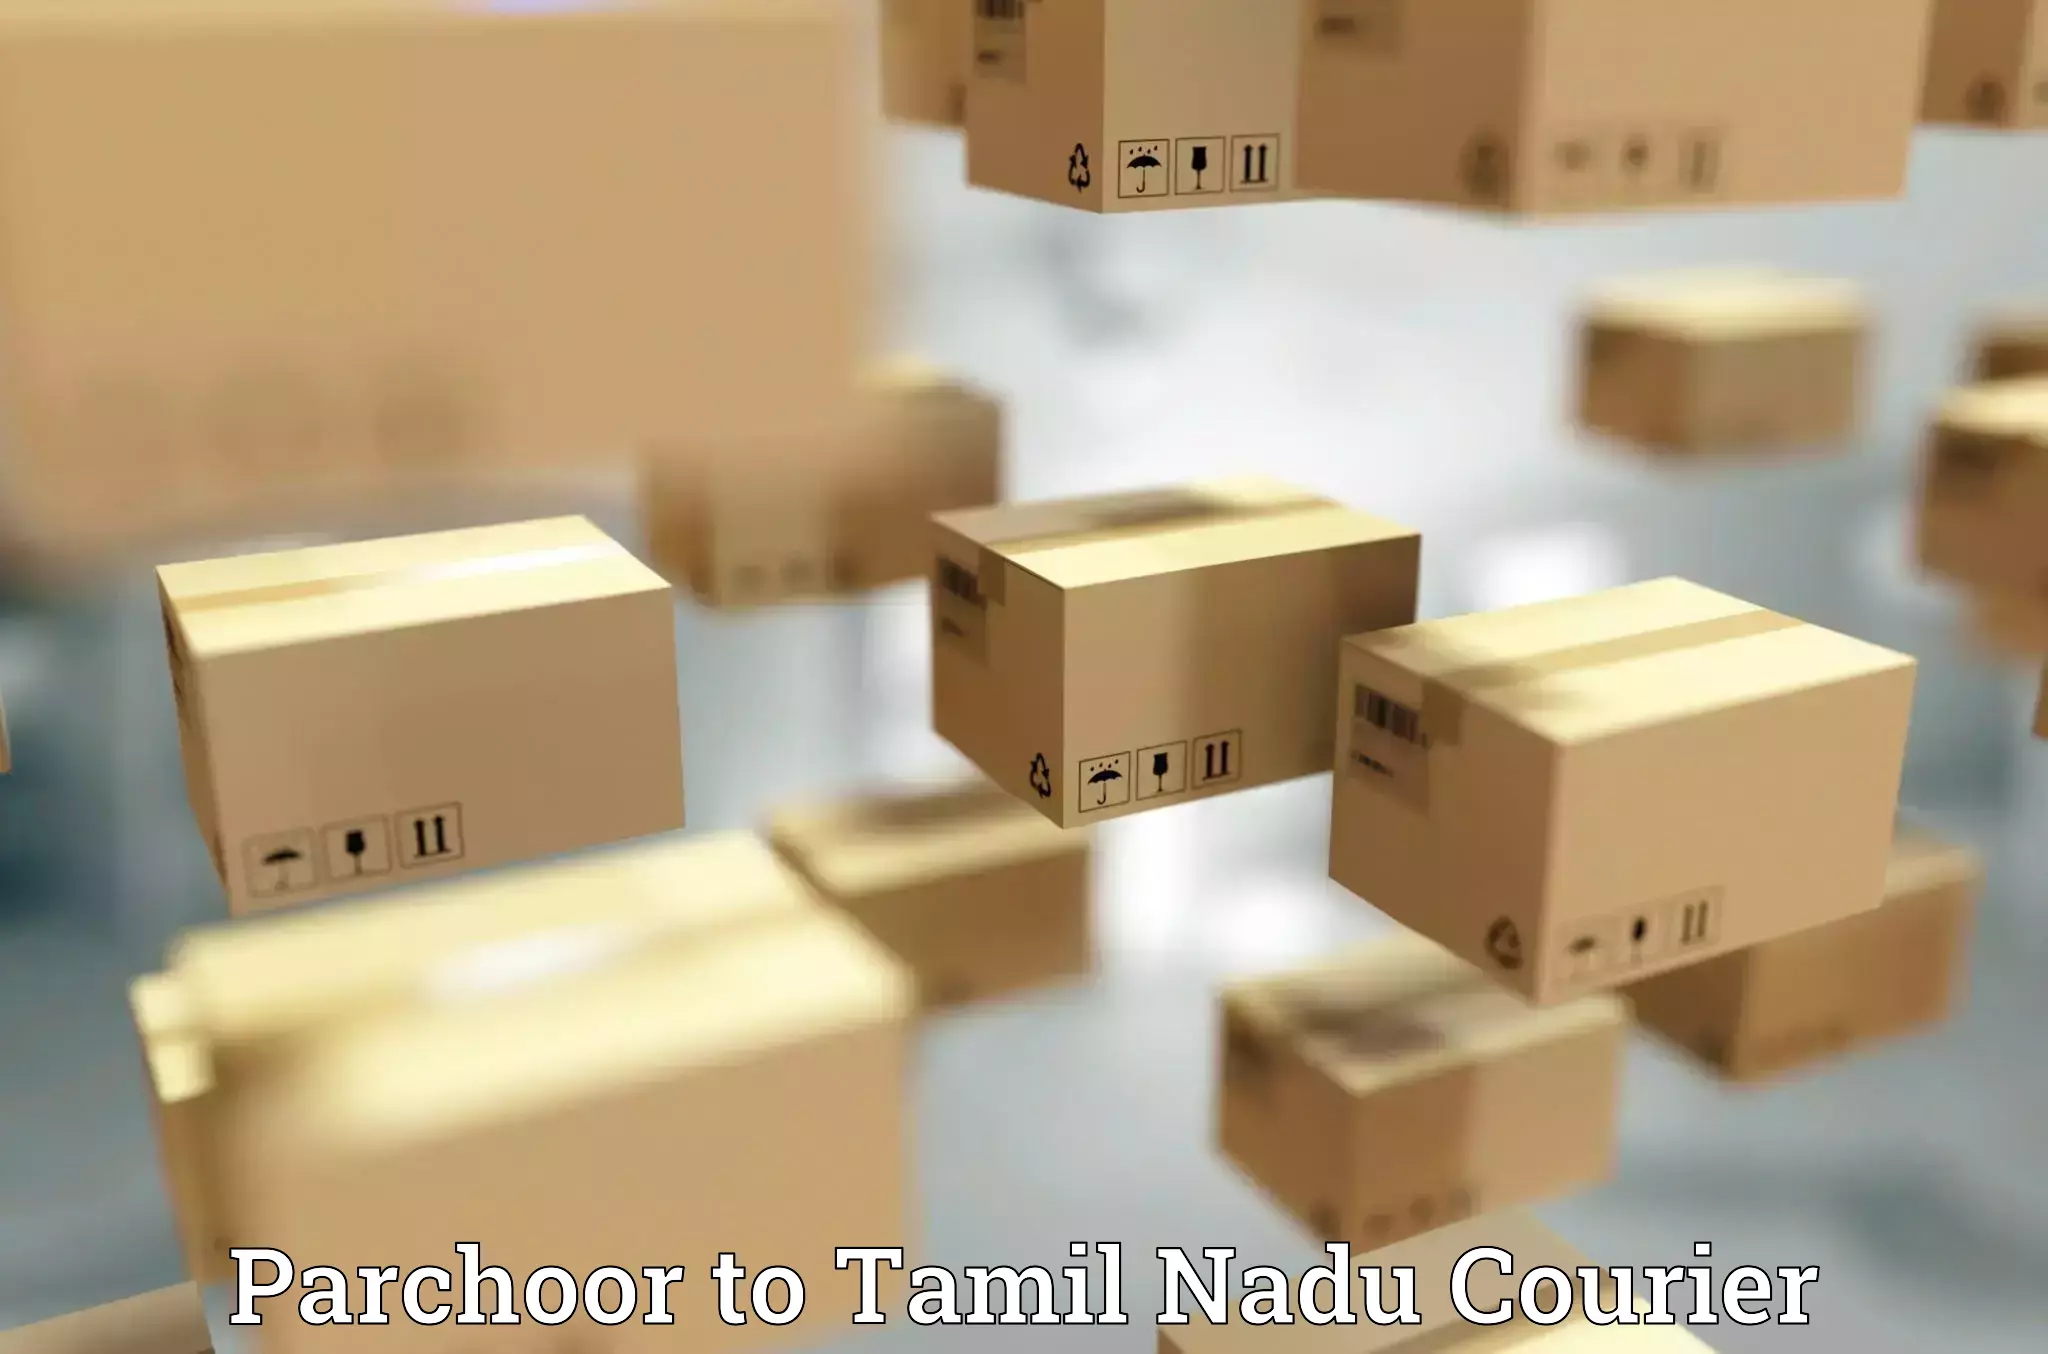 Same-day delivery solutions Parchoor to Nagercoil